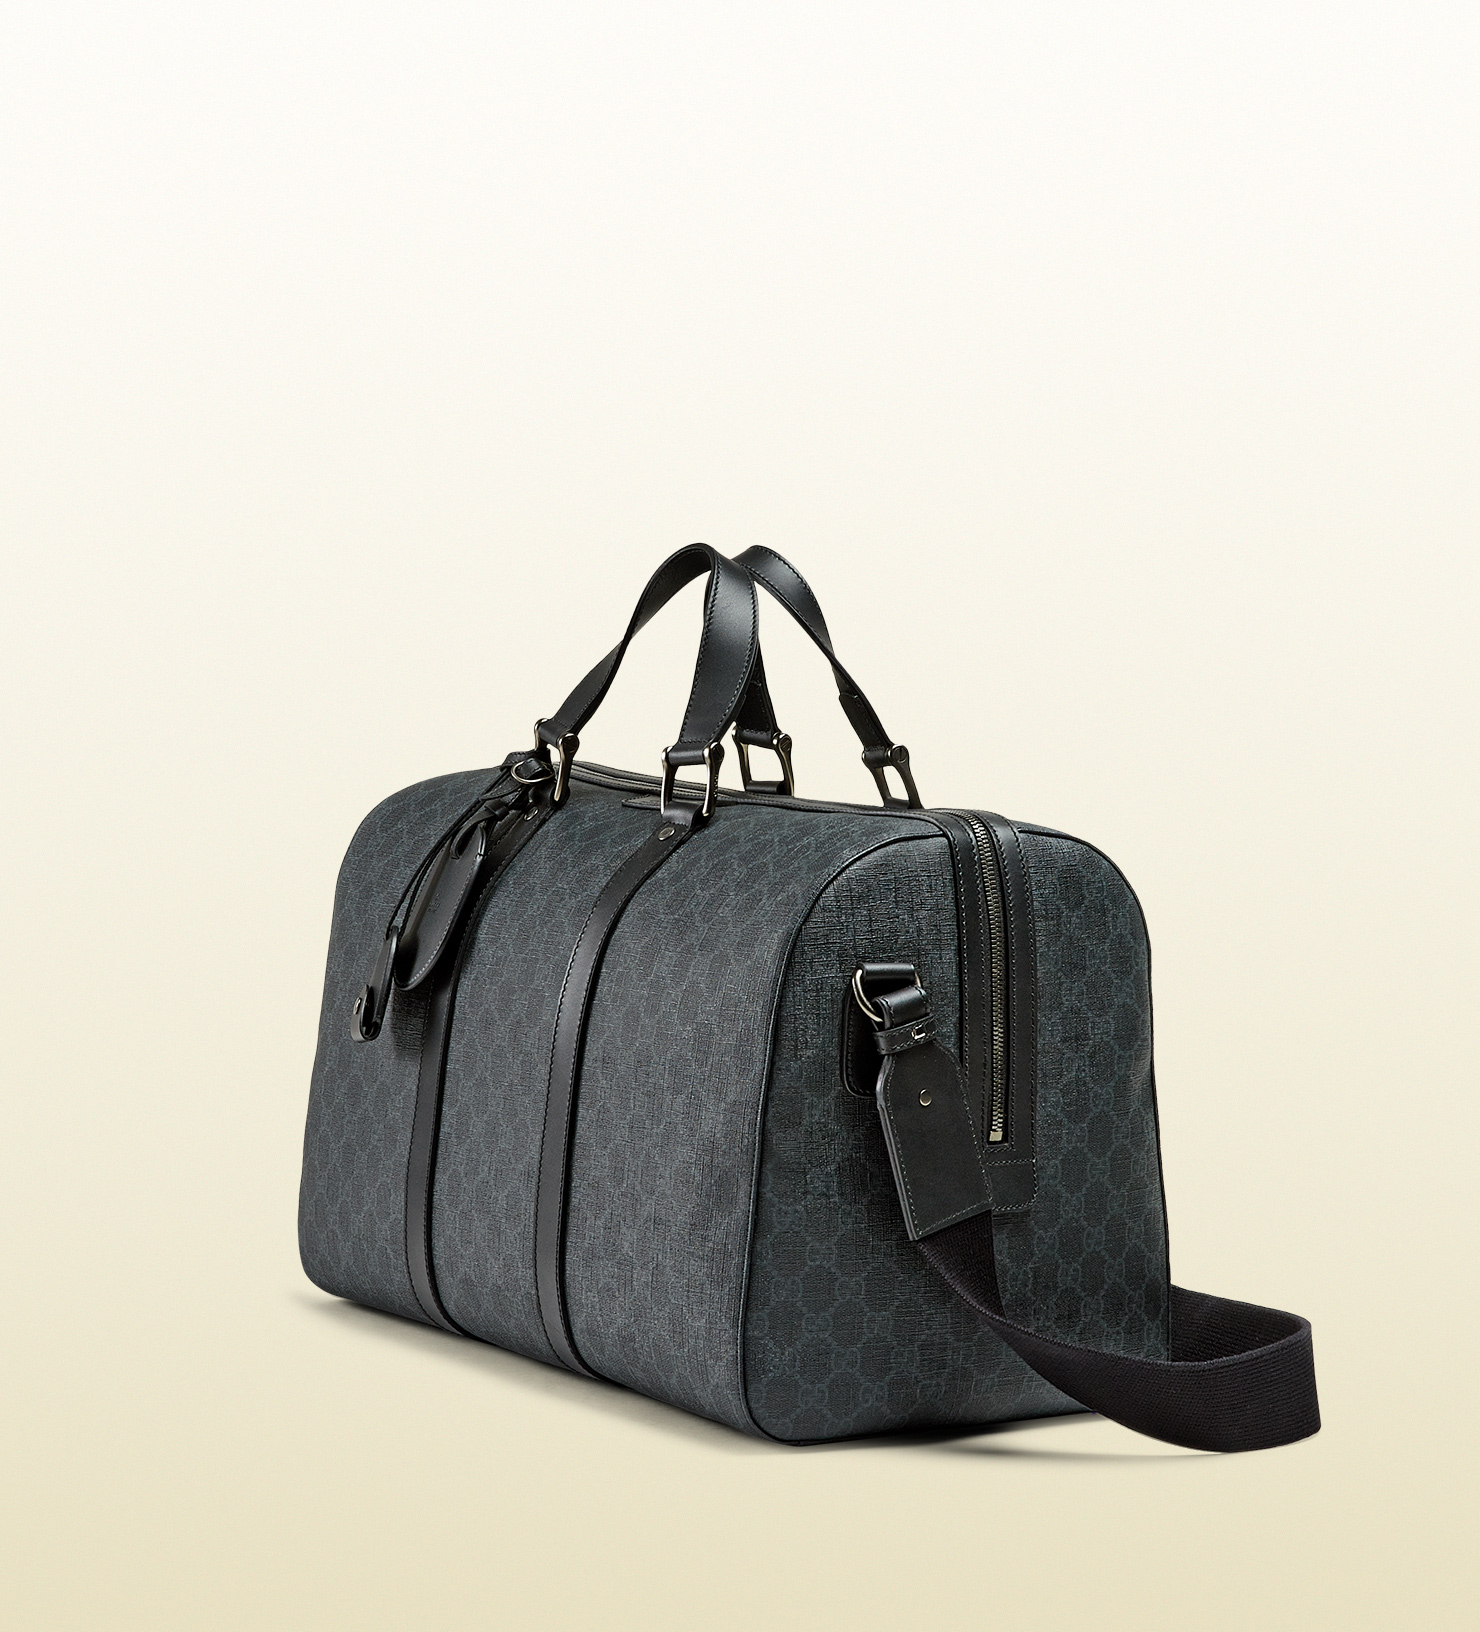 Gucci Black GG Supreme Canvas Night Courrier Carry-On-Duffle at